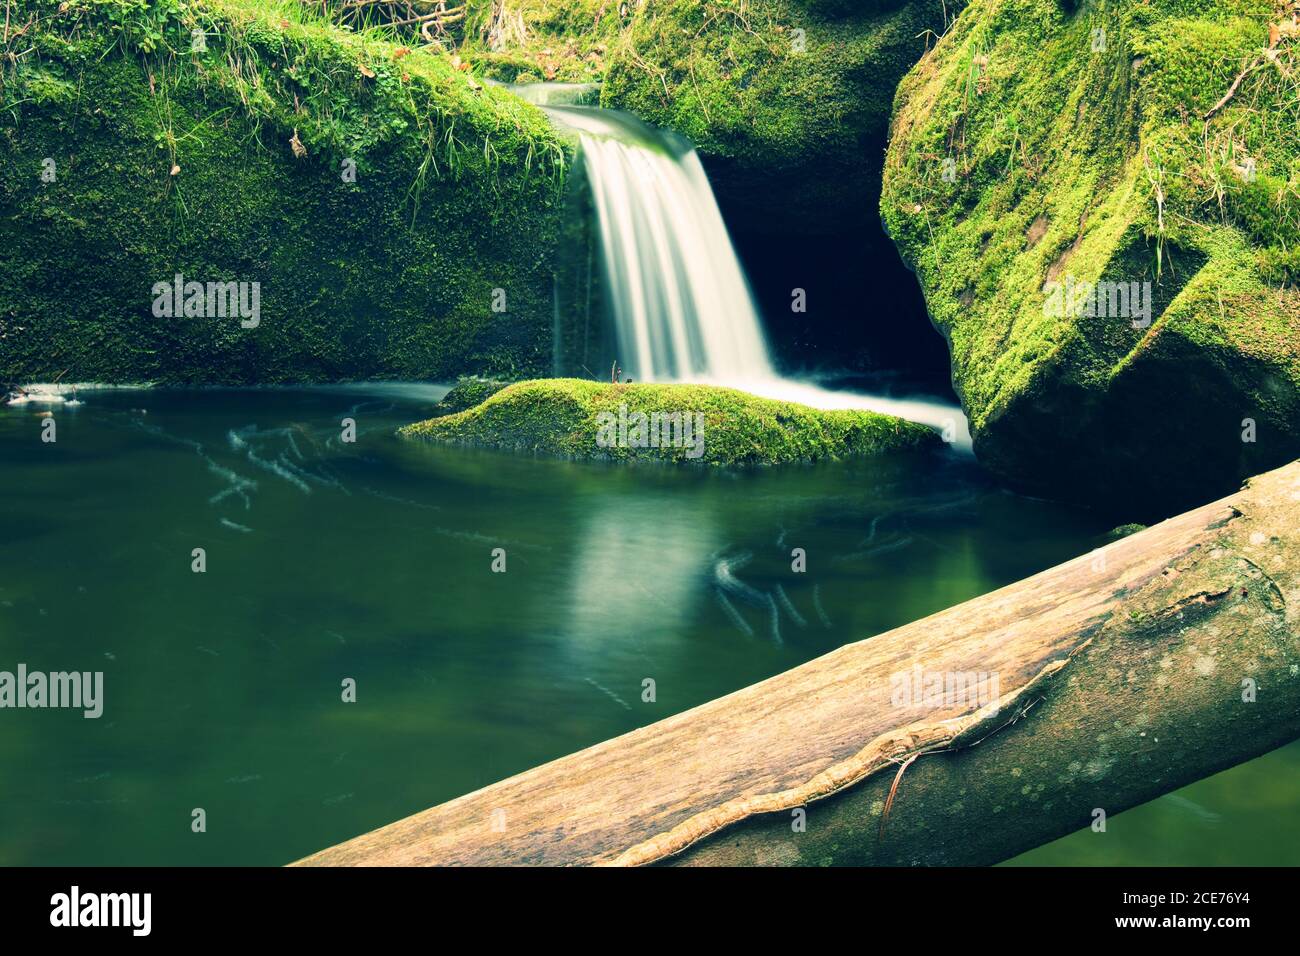 Torrent,  mountain stream with mossy stones, rocks and fallen tree. Stock Photo